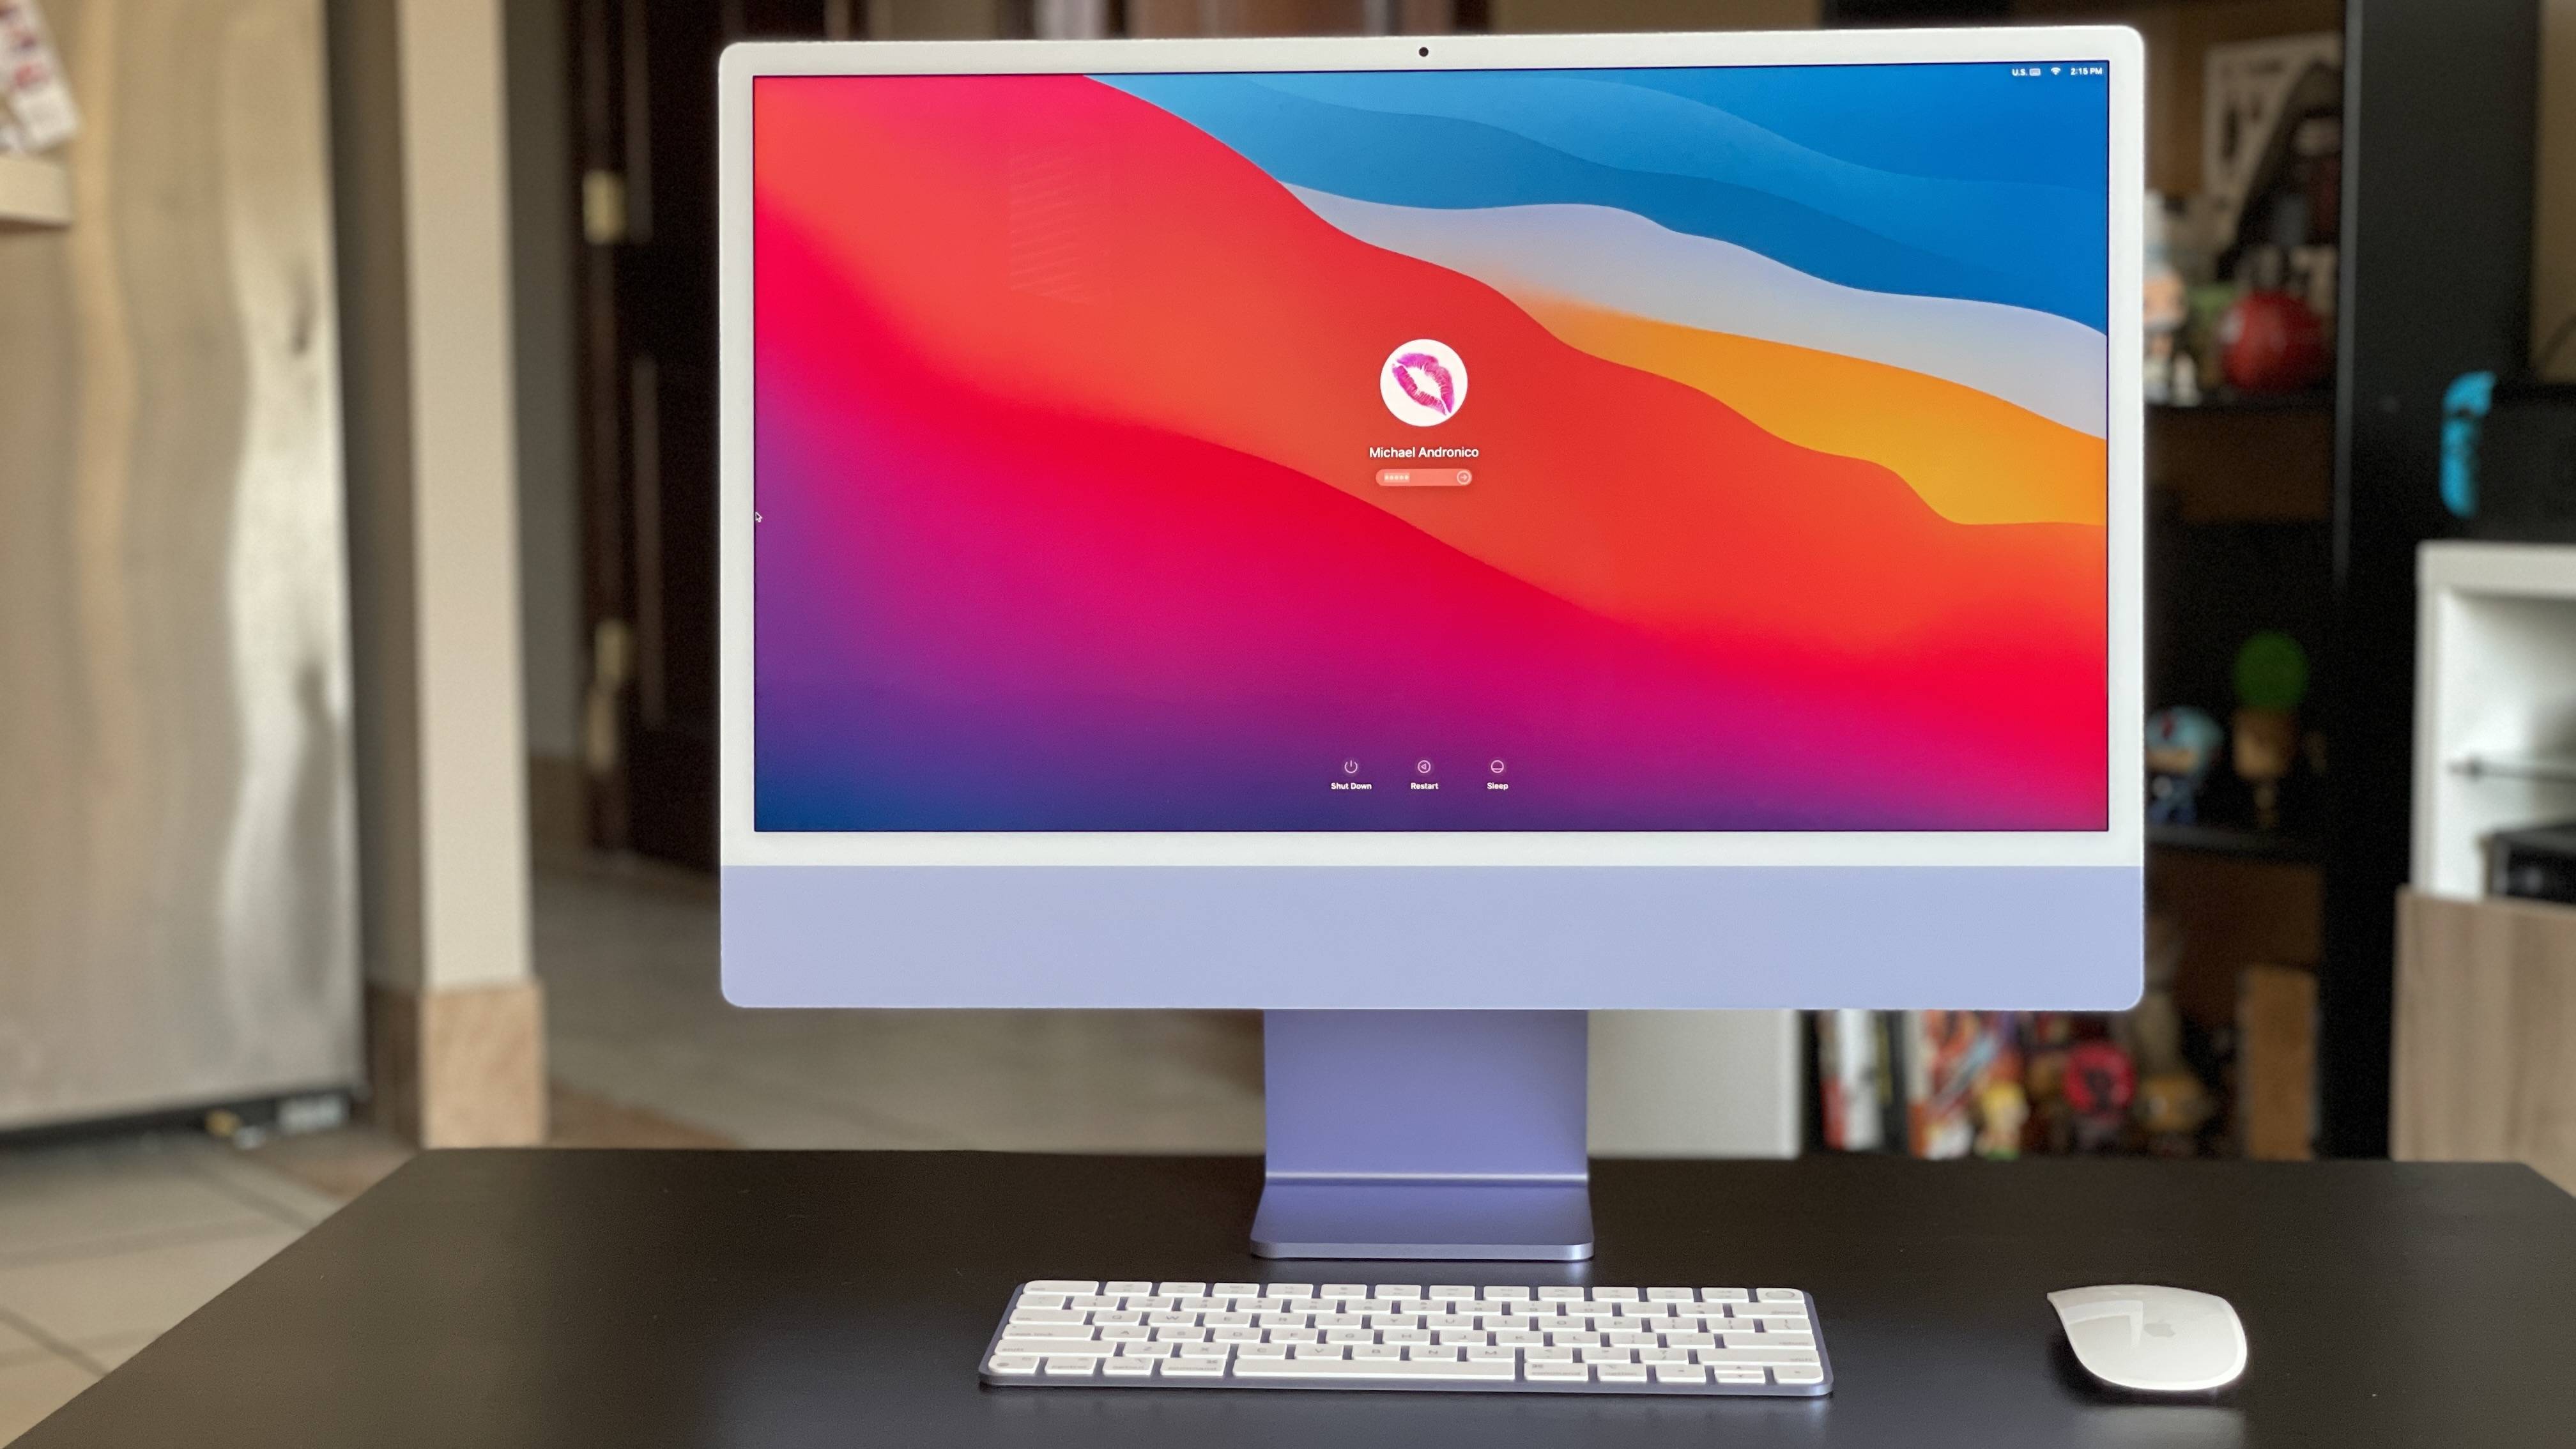 24inch compatible monitor for mac